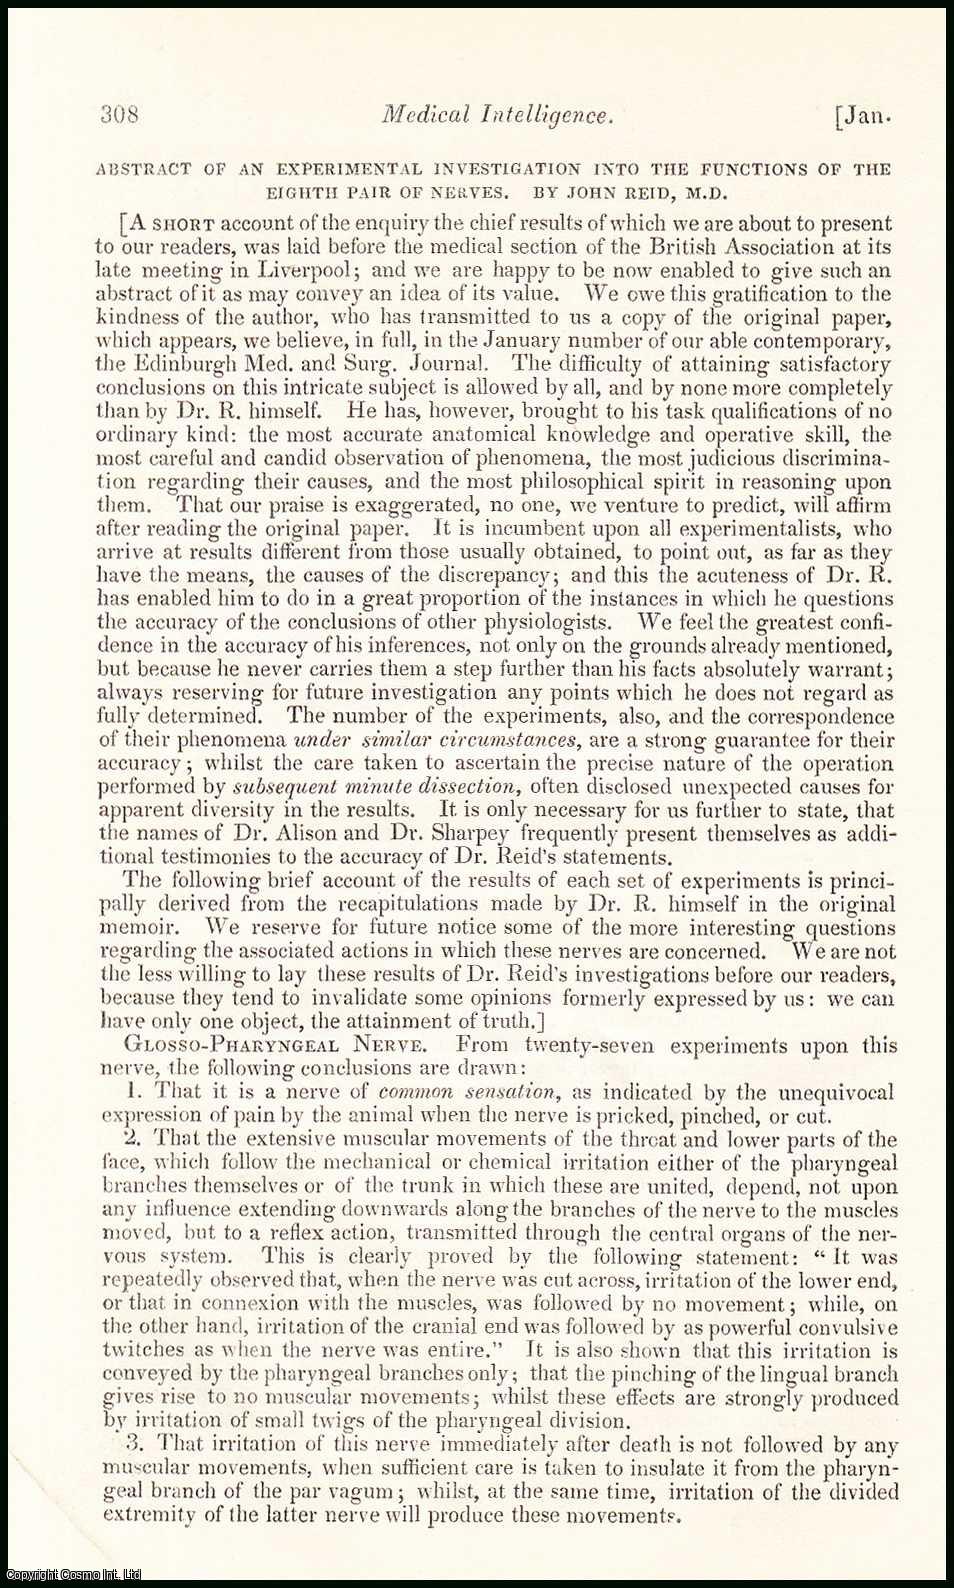 No author is given for this article - Abstract of an Experimental Investigation into the Functions of the Eighth Pair of Nerves. An original essay from the British & Foreign Medical Review, 1838.